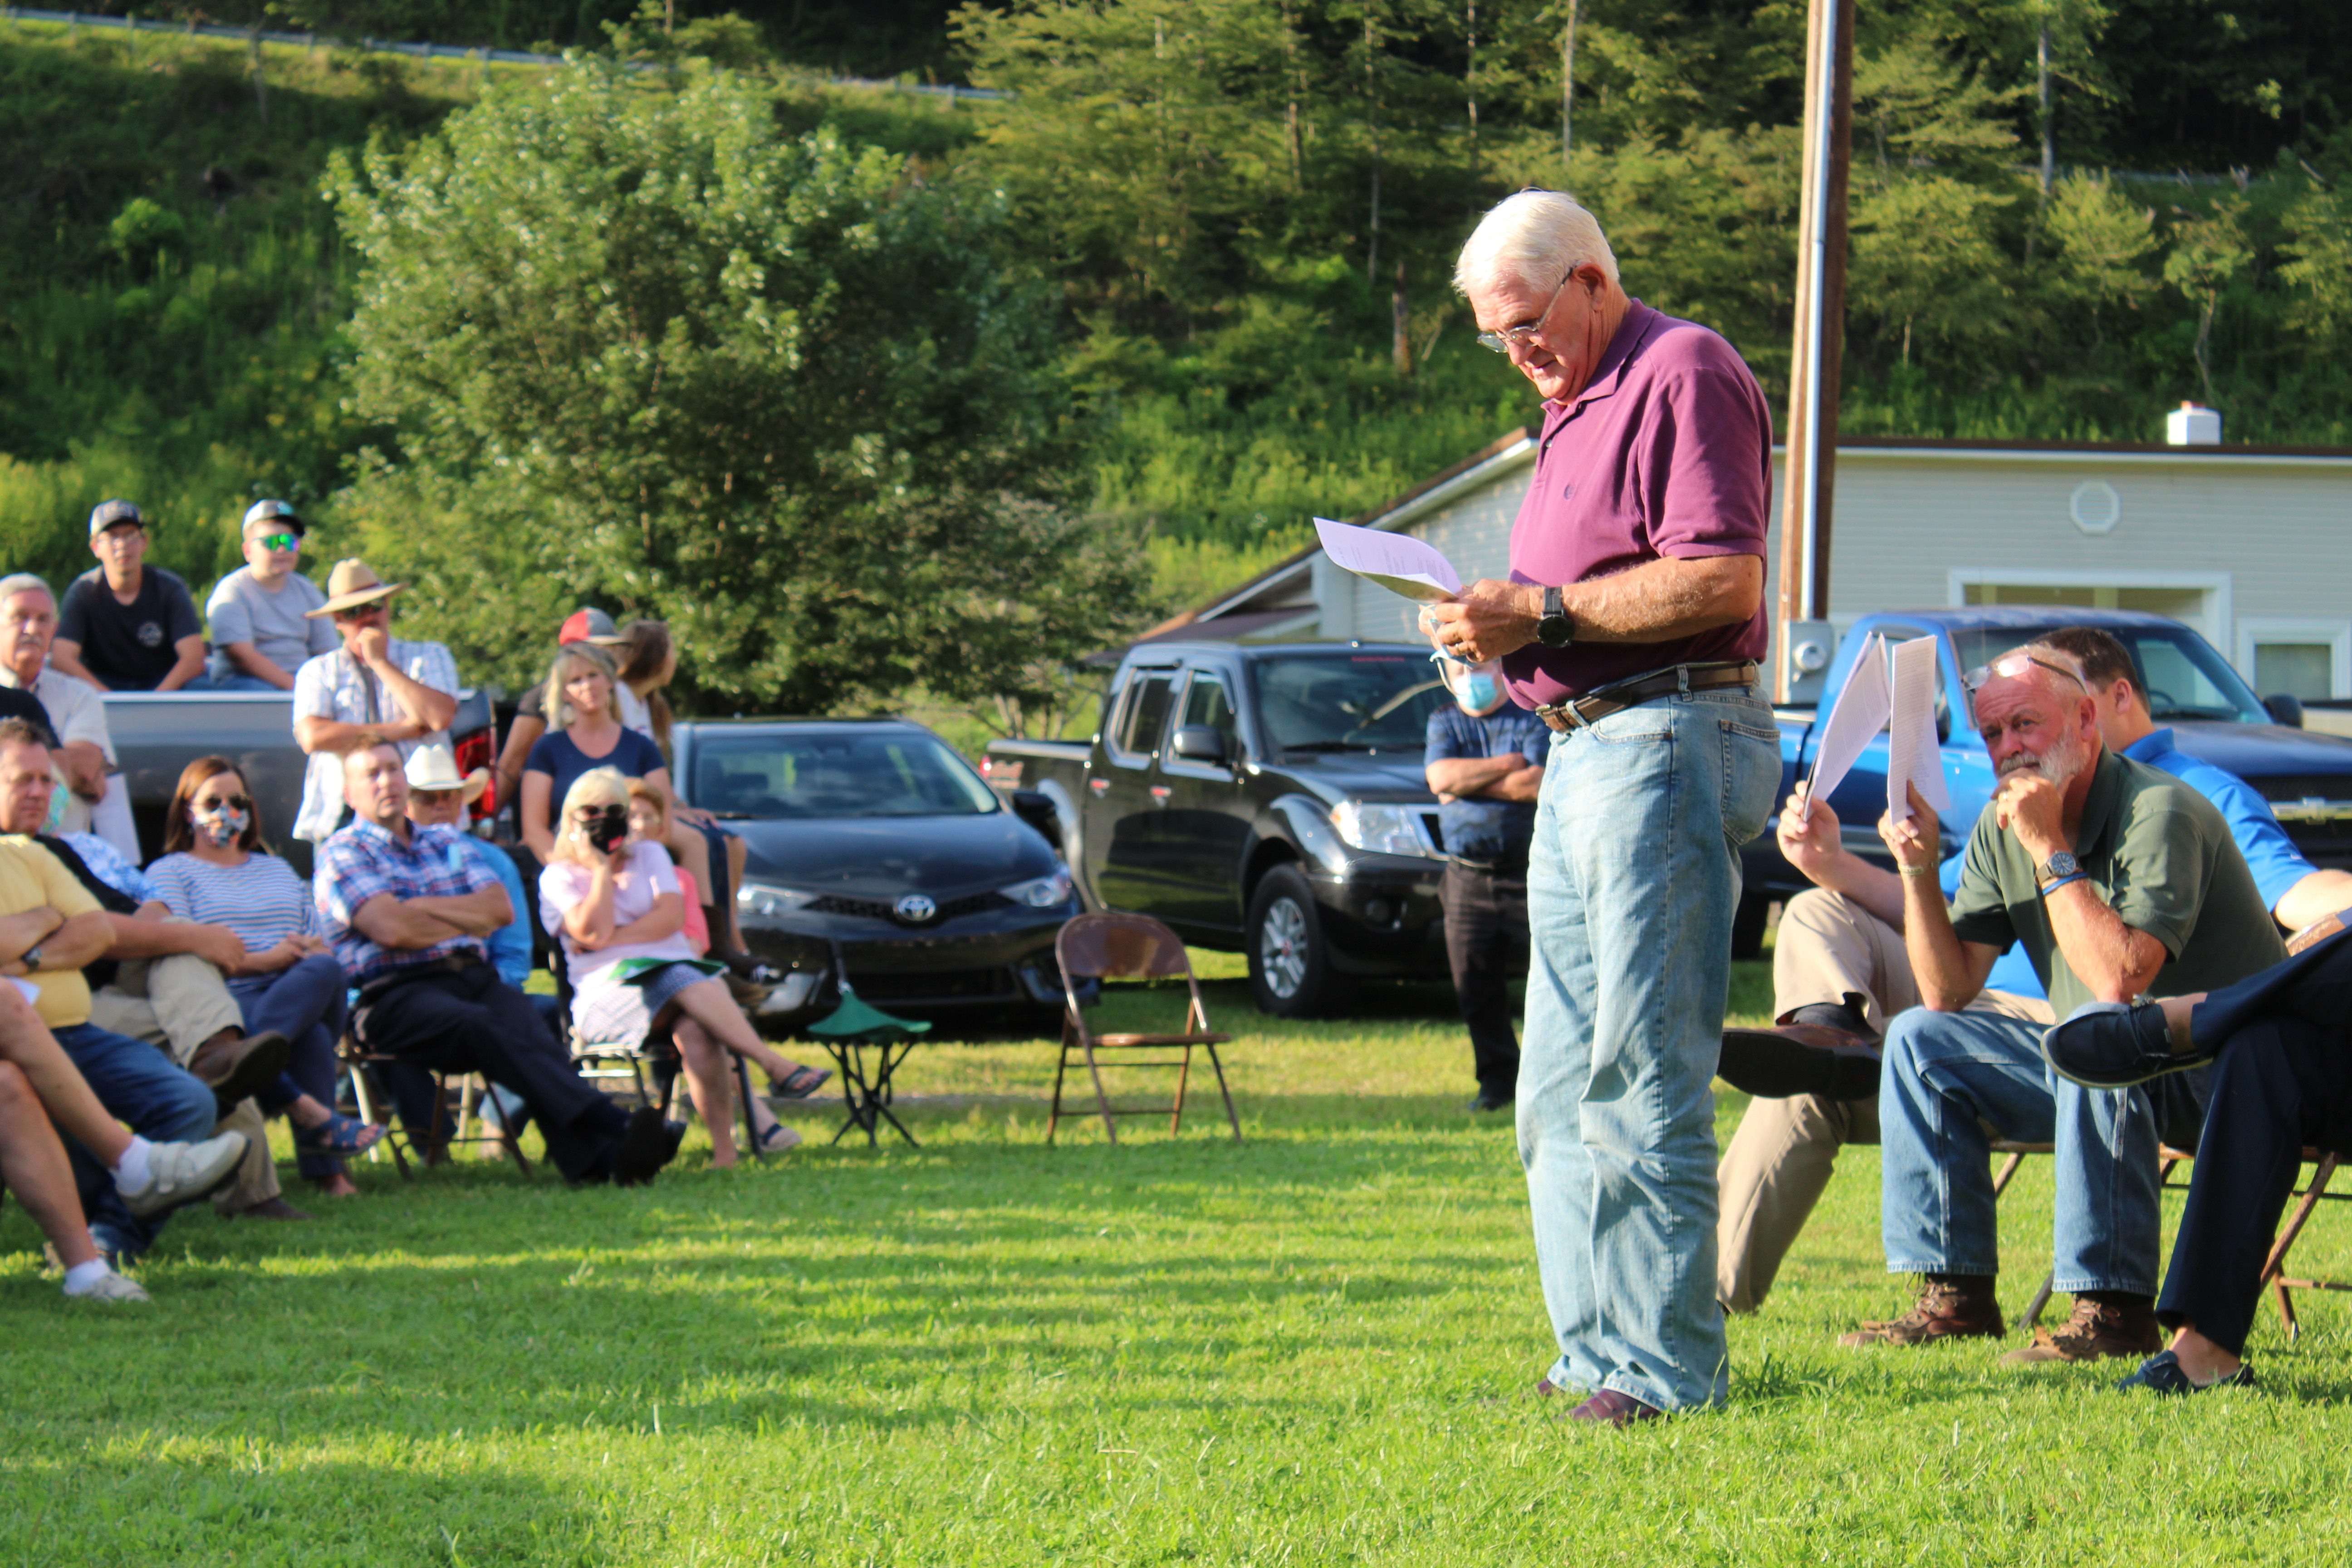 Local resident Doug Harrell speaks to the commissioners and crowd about his opinion regarding a possible wild and scenic designation for a portion of the Nolichucky River. (MNJ Photo/Juliana Walker)